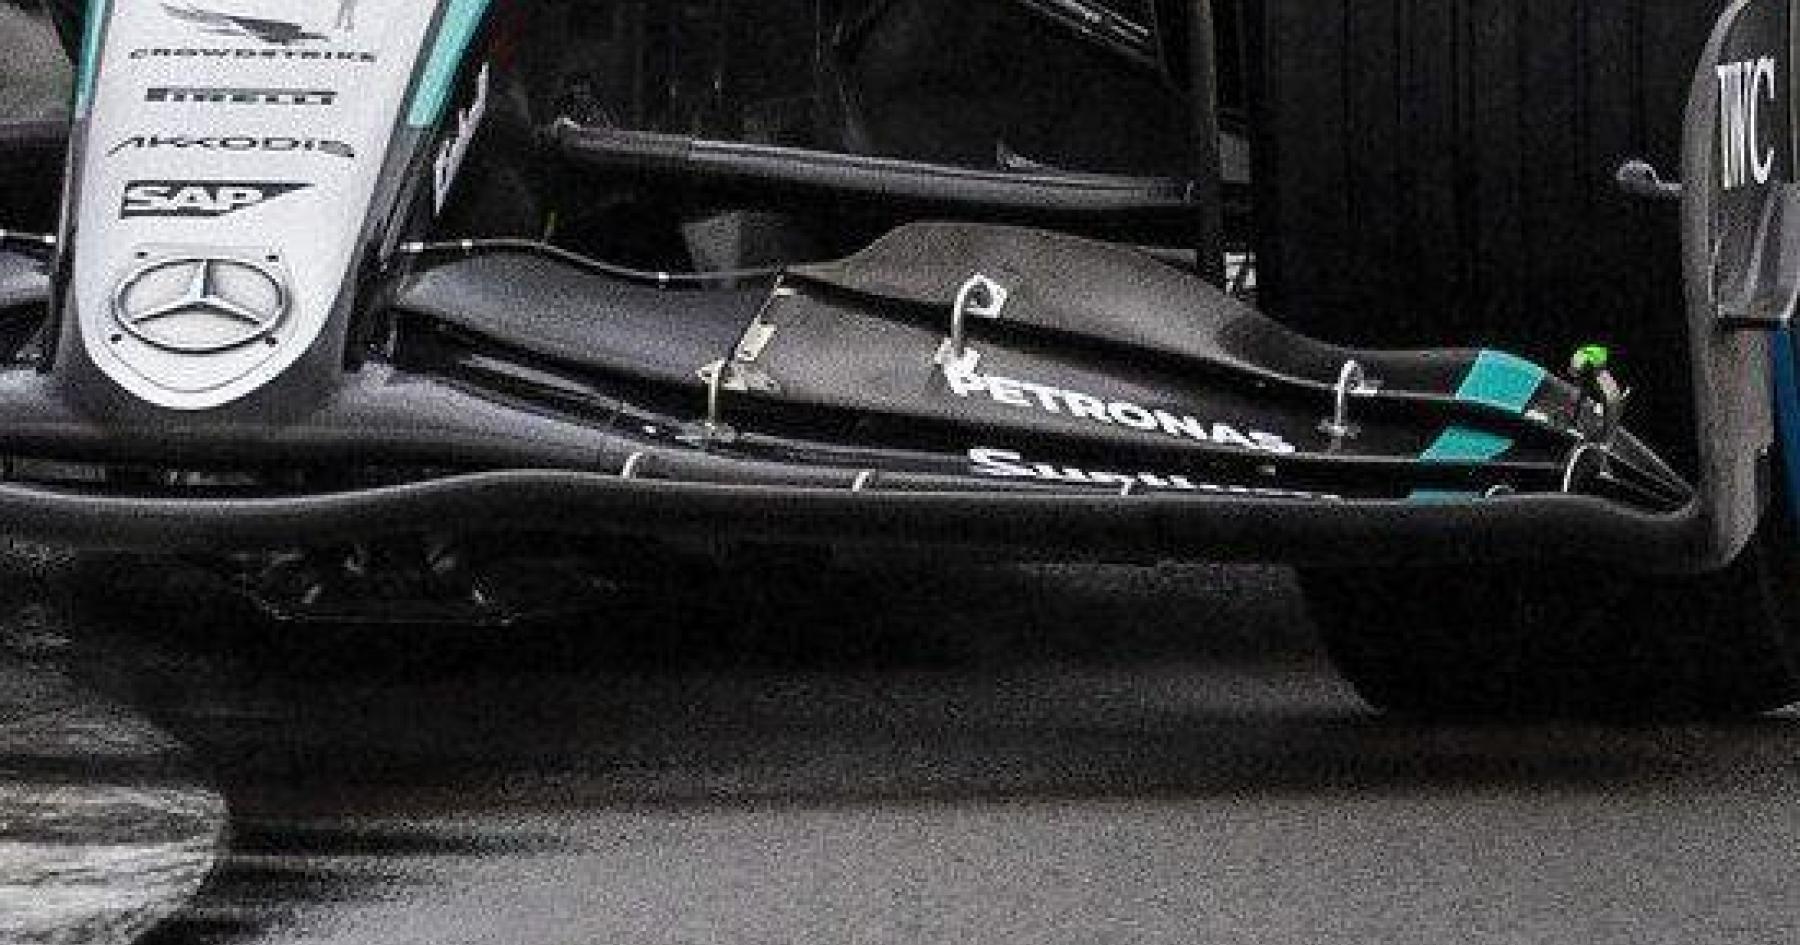 Unwavering Conviction: Mercedes Defends the Legality of Their Controversial Front-Wing Design